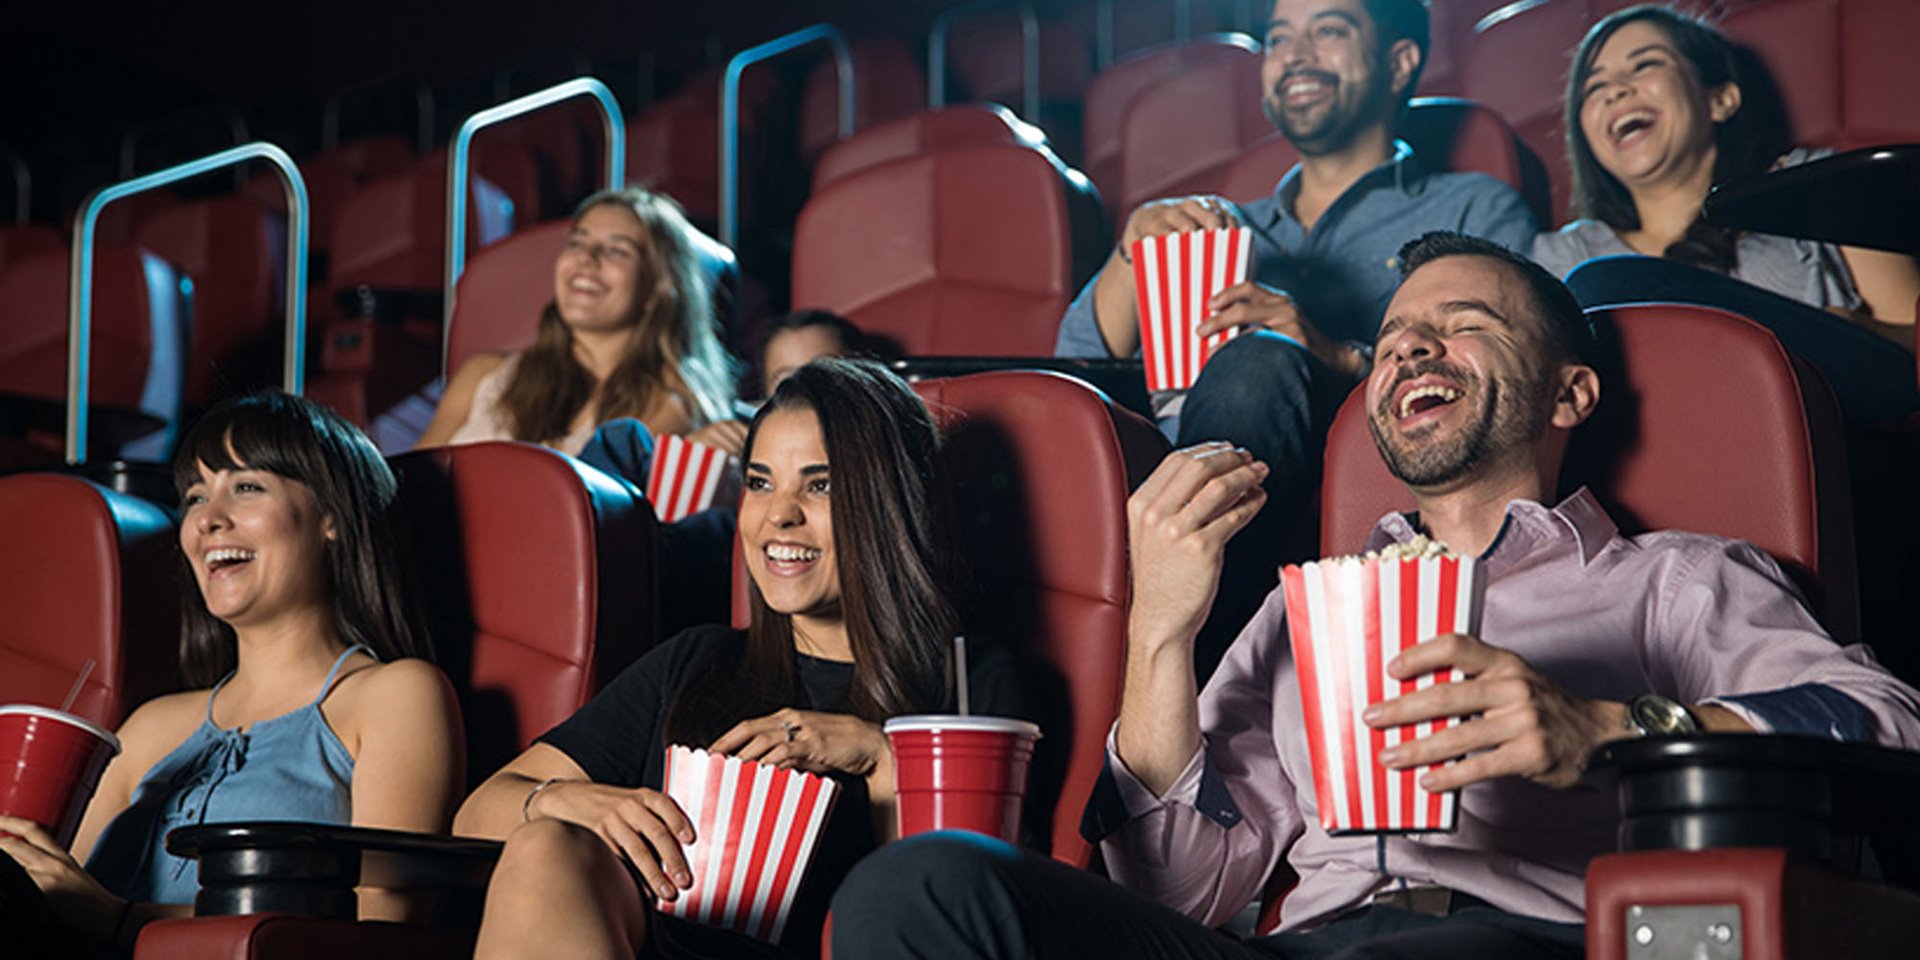 Movie goers eating popcorn and laughing at a movie in a theater 